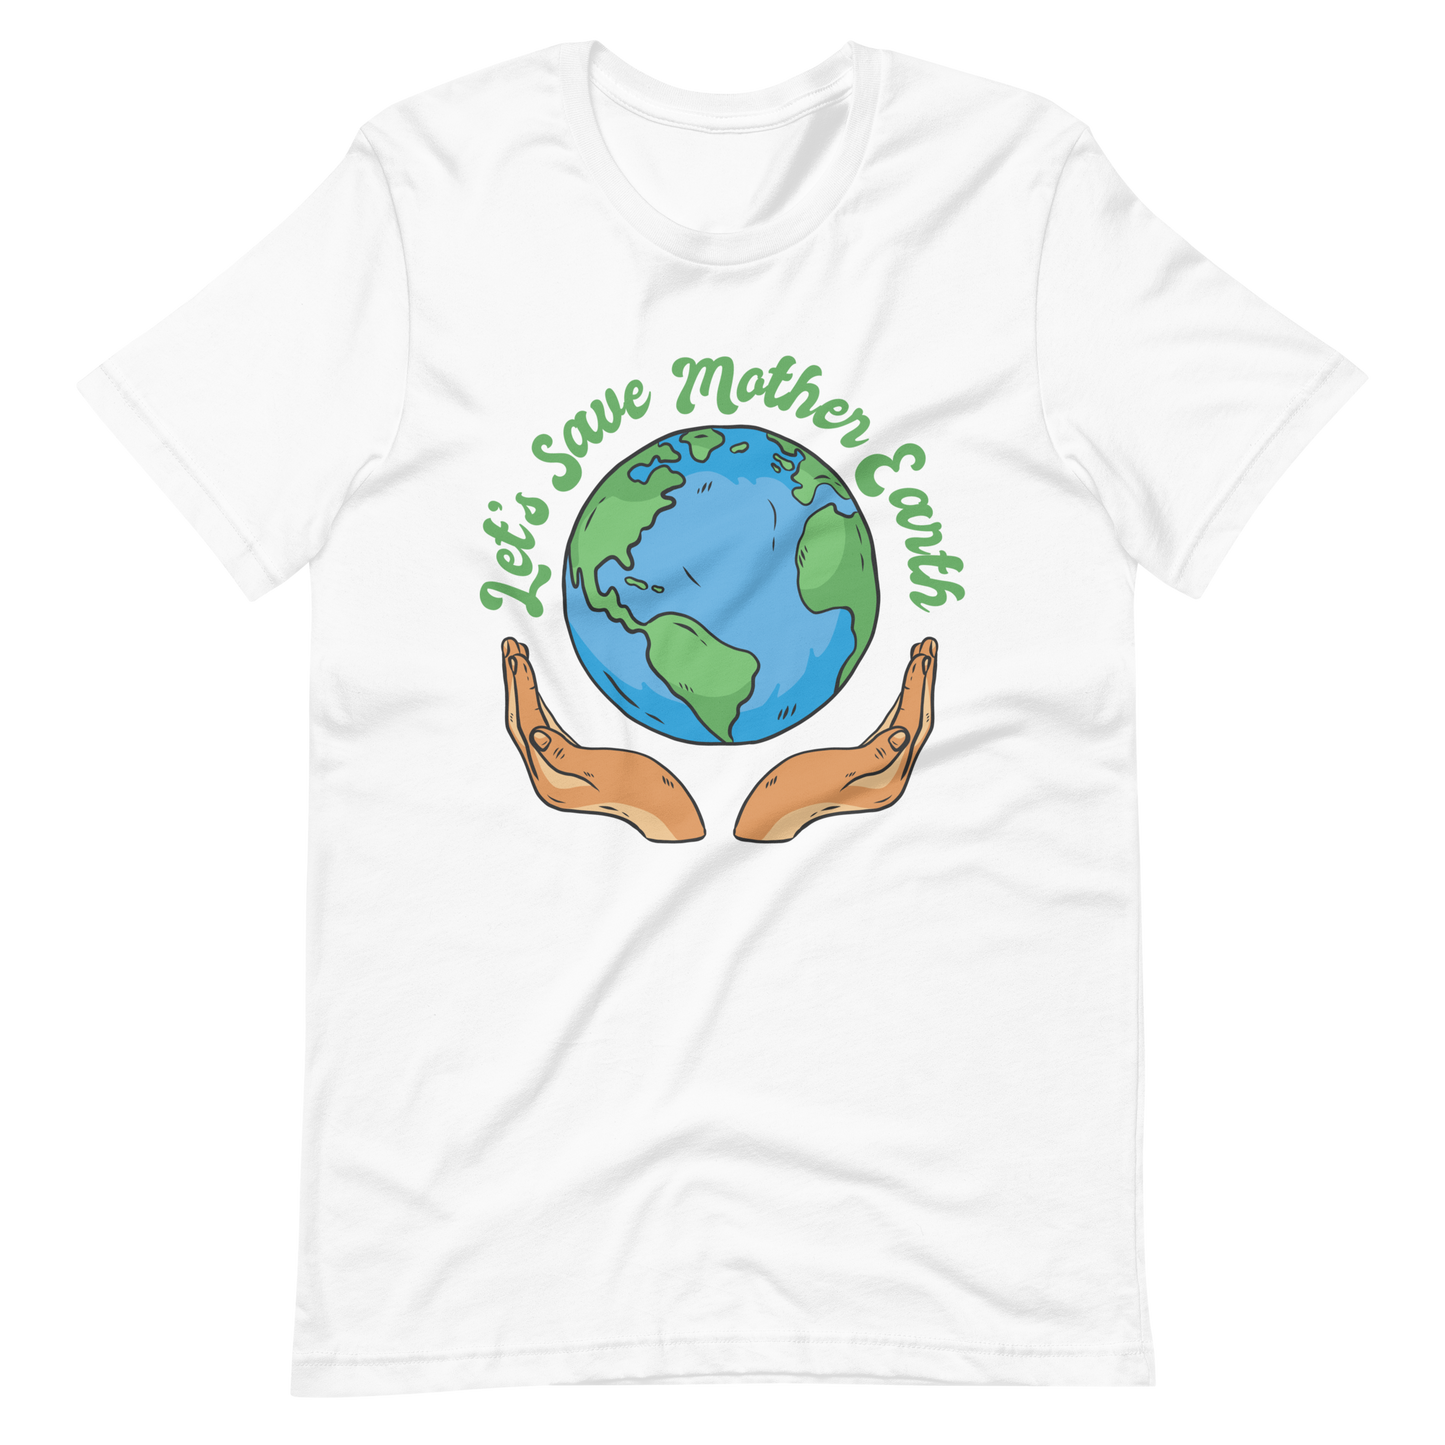 Hands holding planet earth | Unisex t-shirt